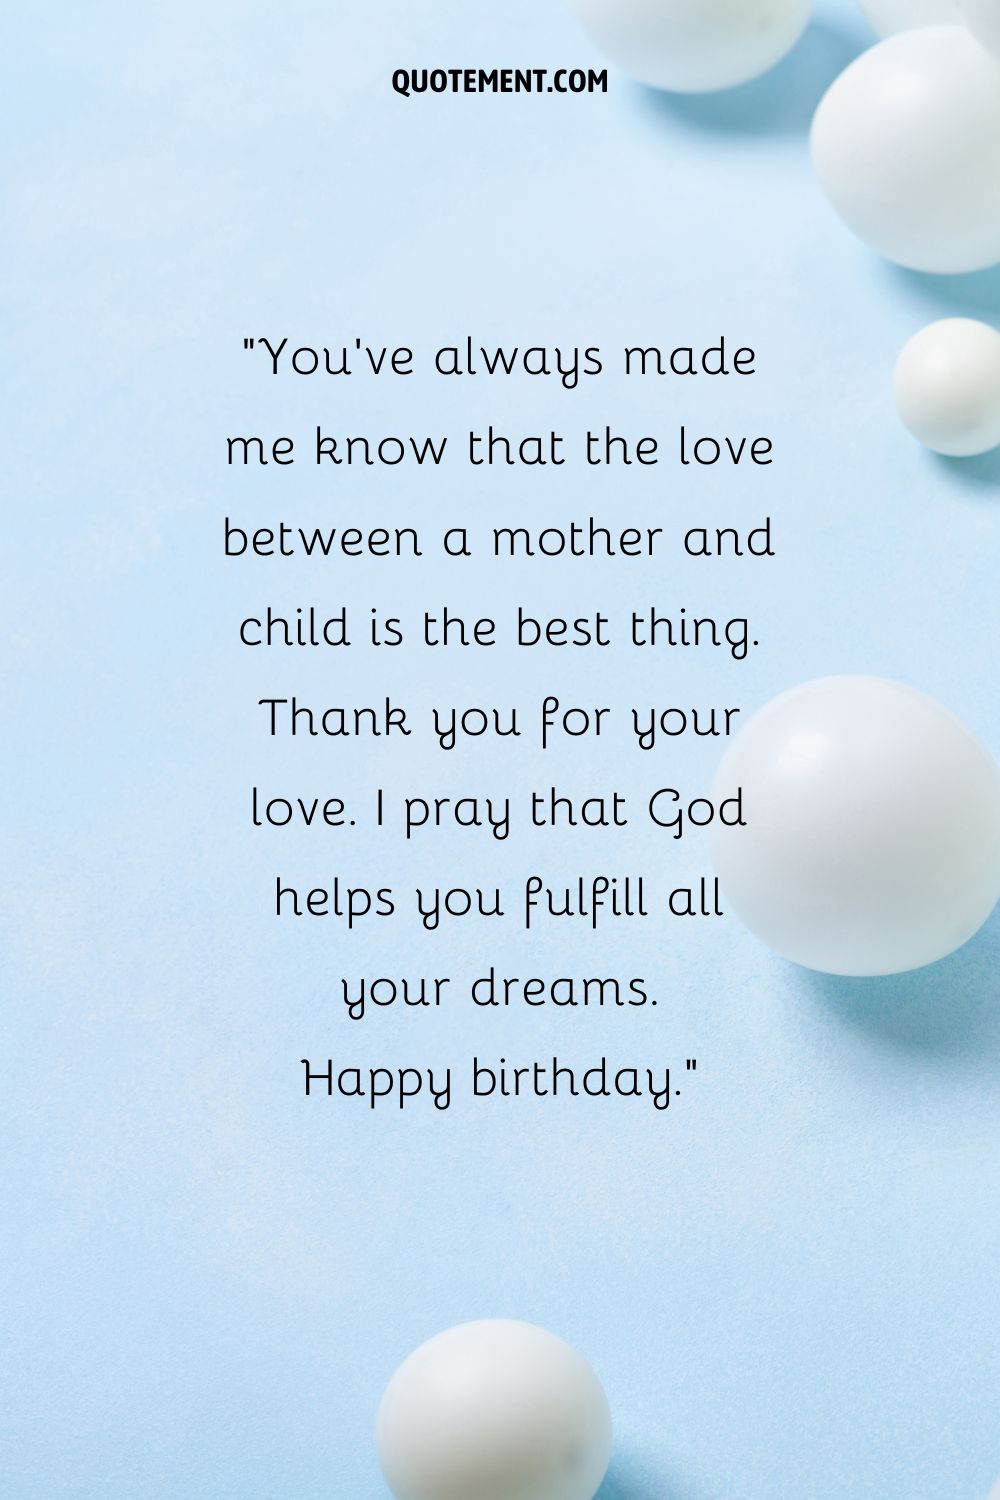 A light blue background with white balloons on the right side